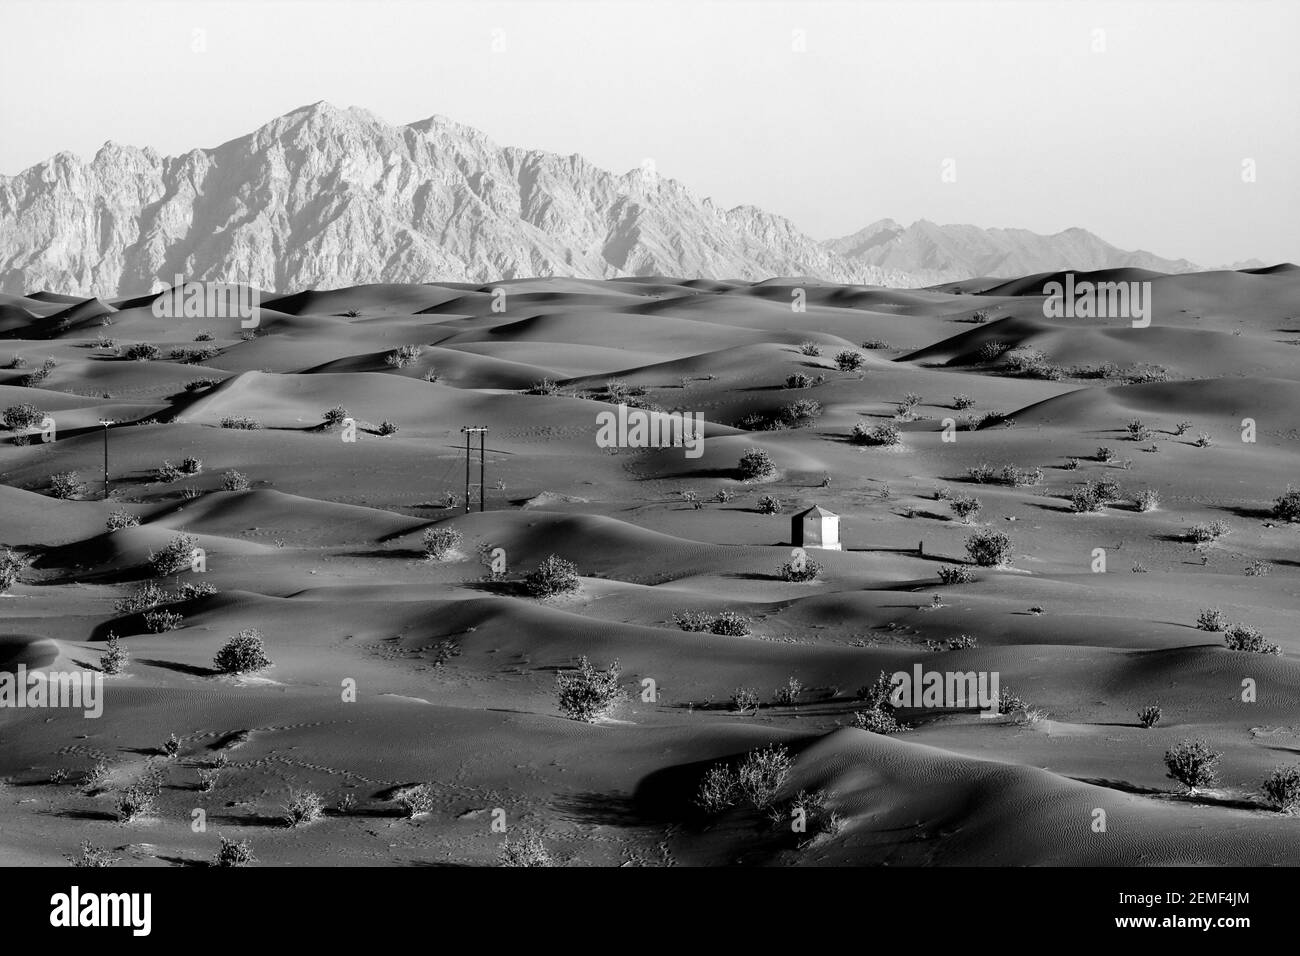 Monochrome, black and white, image of sand dunes, Abu Dhabi Emirate, United Arab Emirates. The mountains in the distance are in Oman. Stock Photo